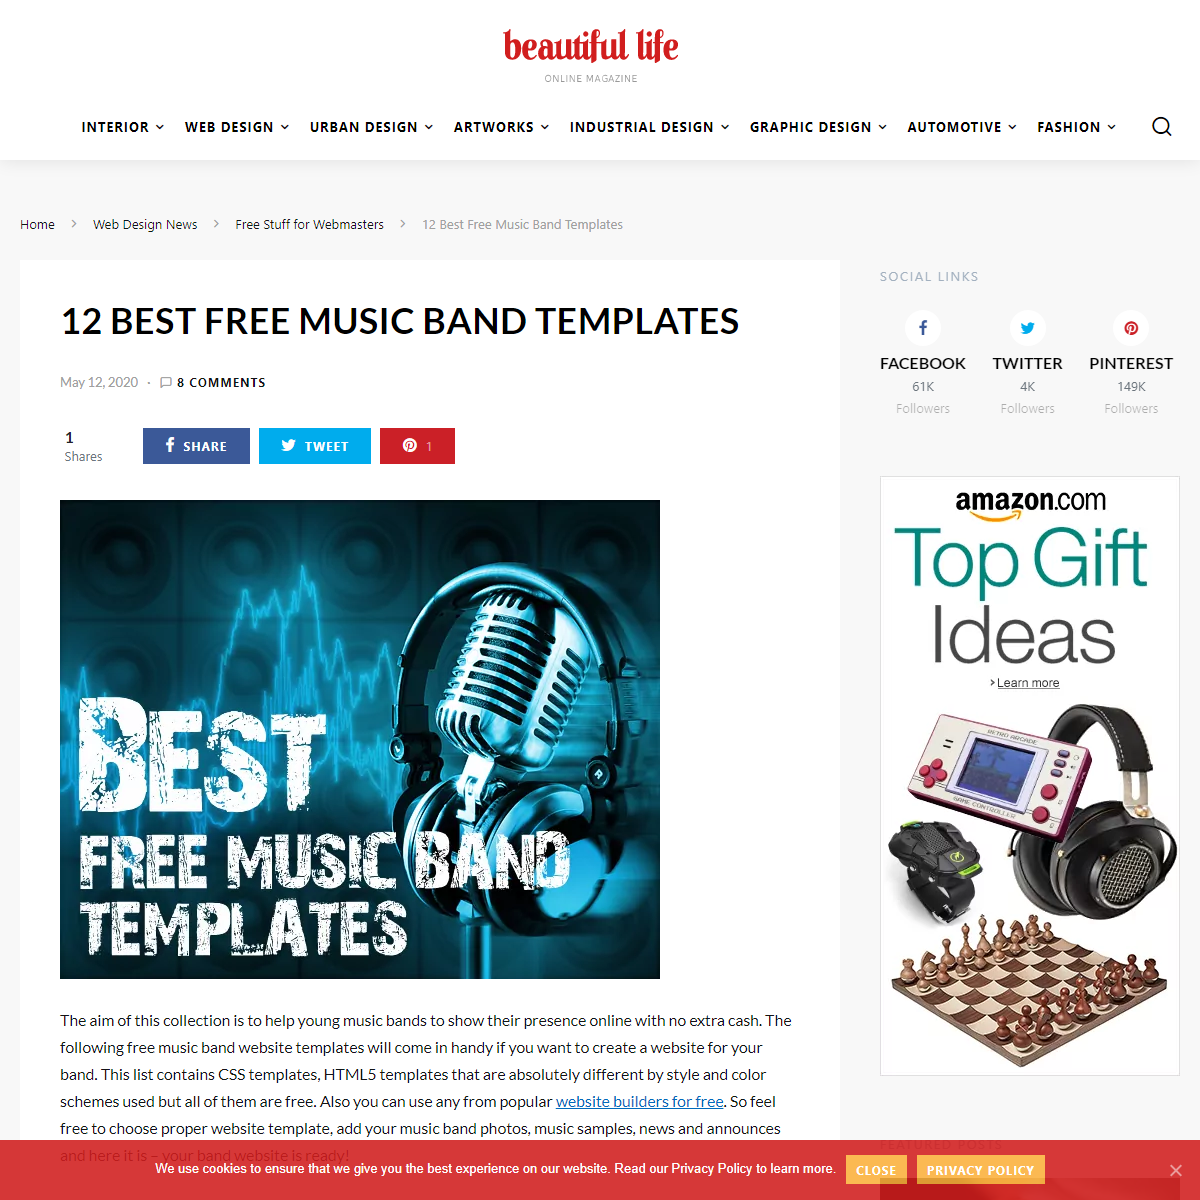 A complete backup of https://www.beautifullife.info/web-design/12-best-free-music-band-templates/